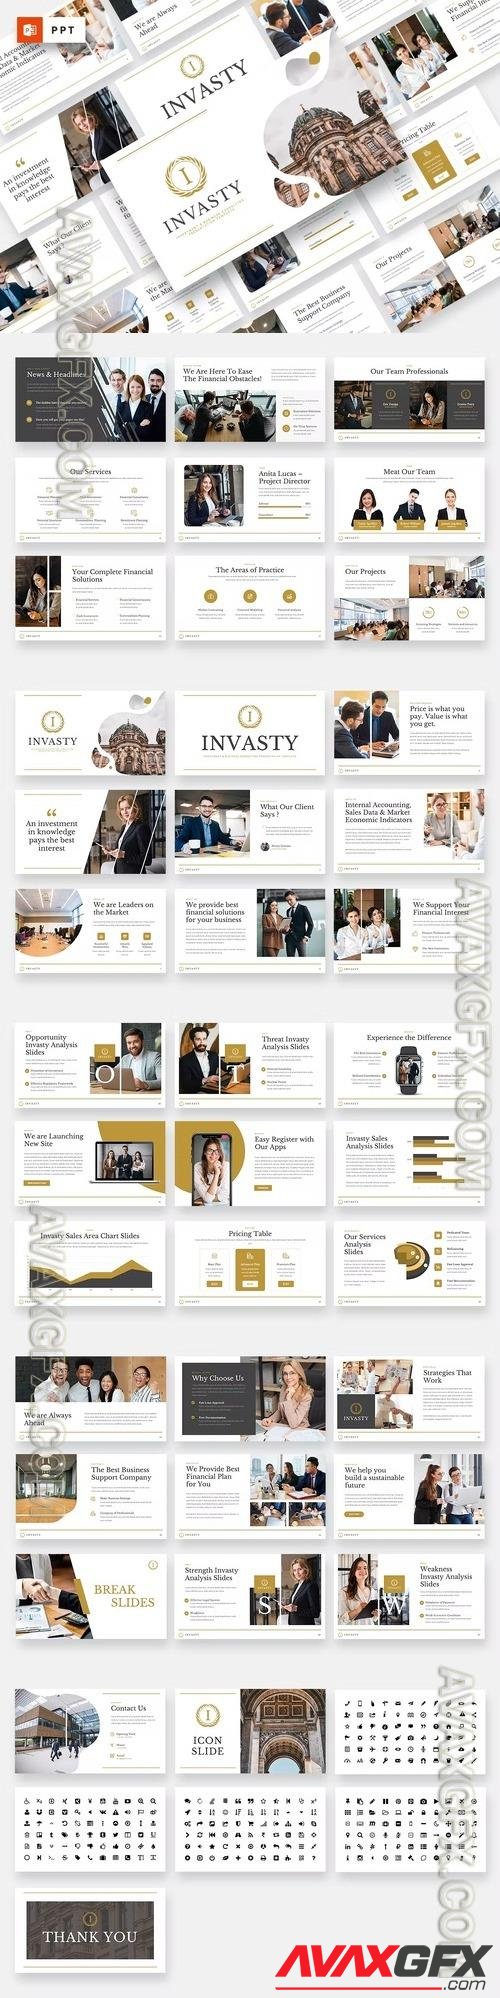 INVASTY - Investment Powerpoint Template